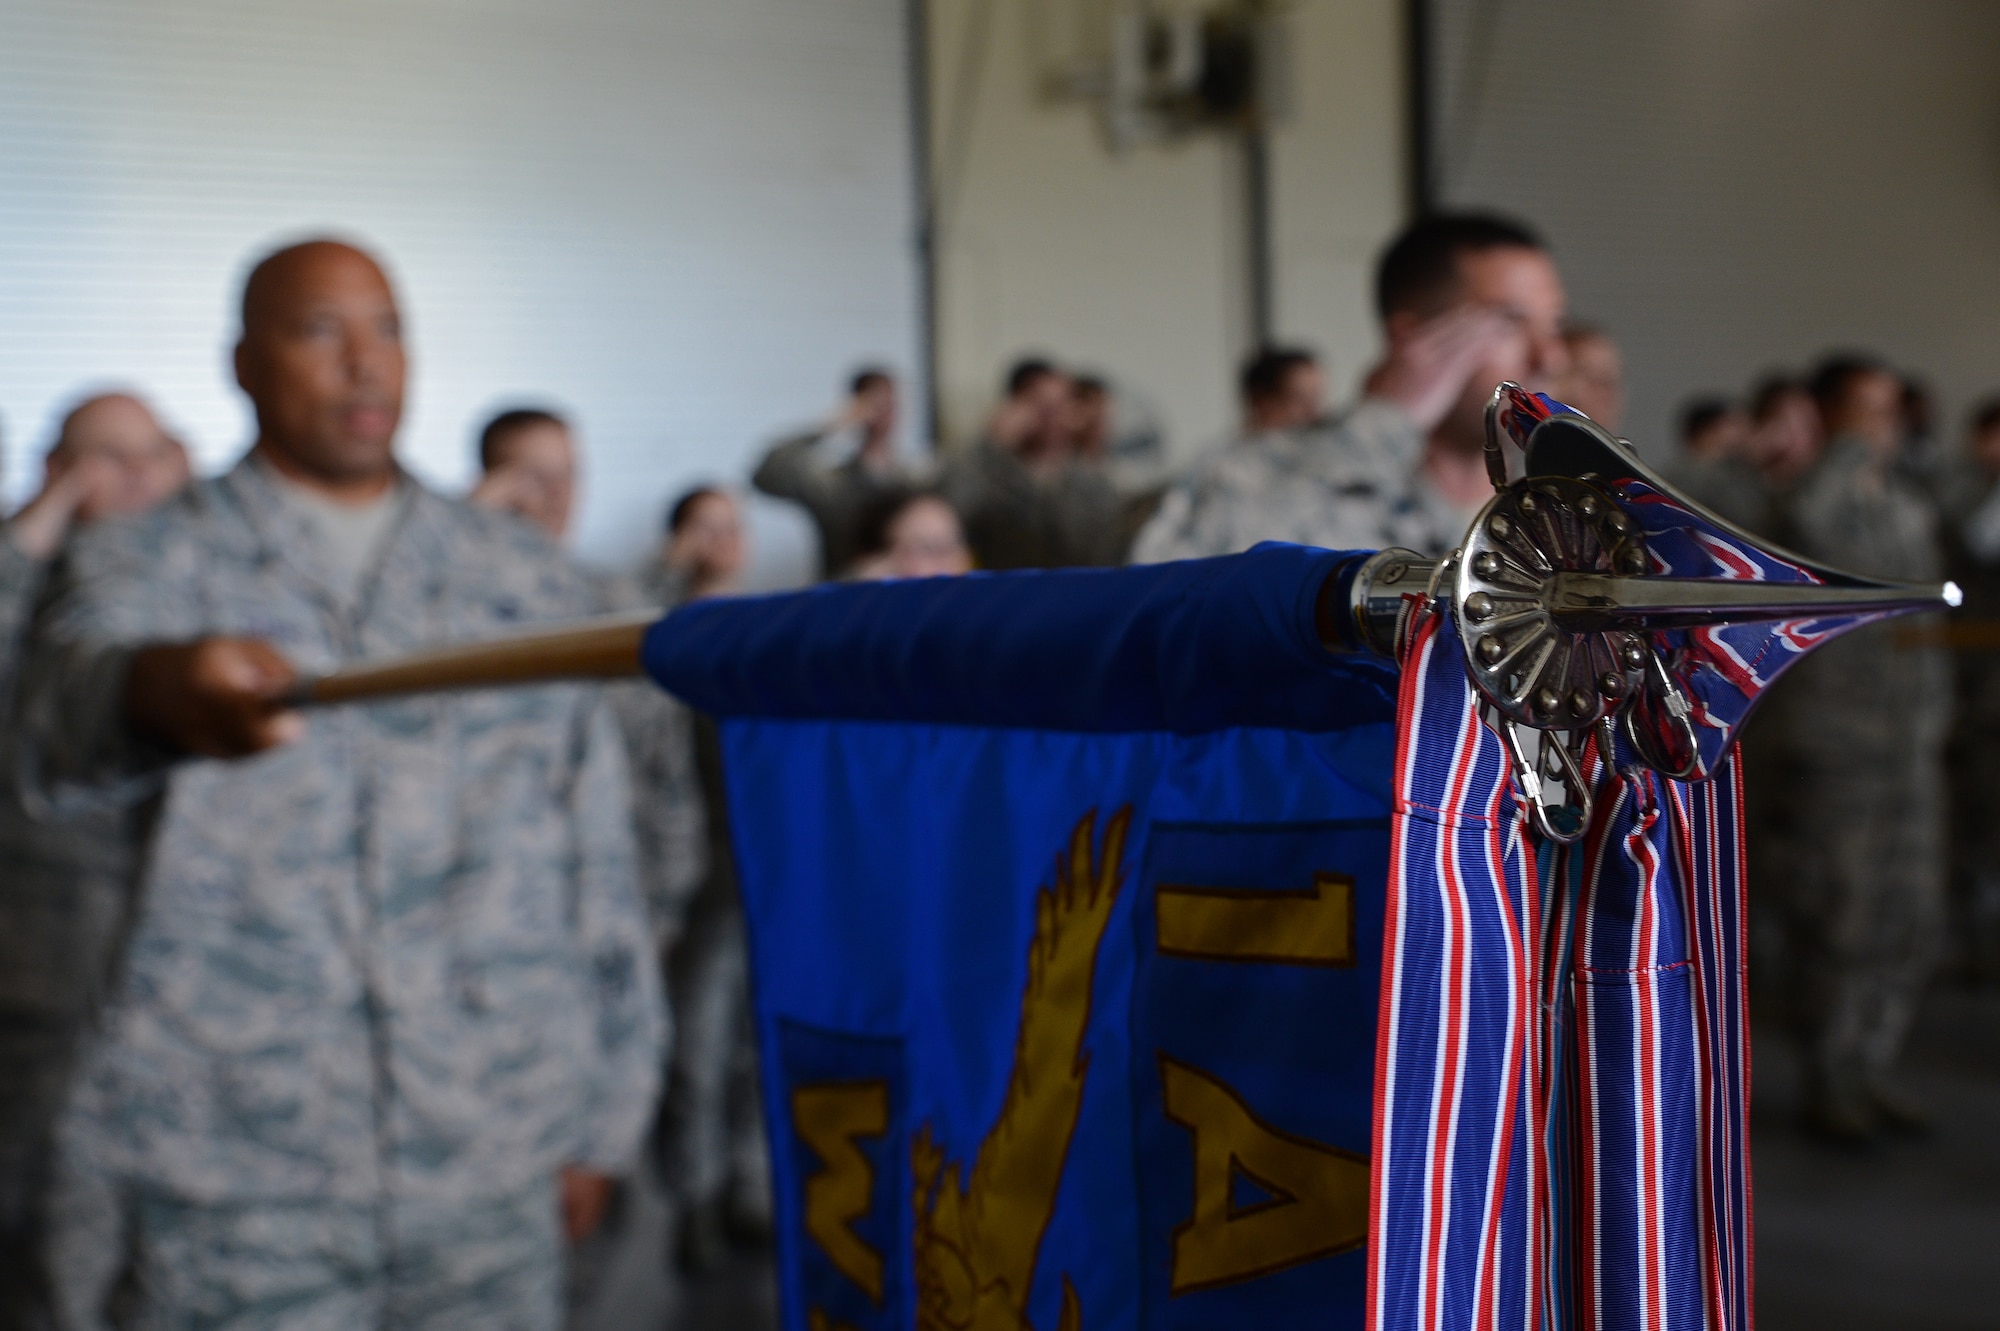 Senior Master Sgt. Malik Barnes, 1st weather Squadron superintendent, presents the 1st WS guidon as the national anthem is played during a change of command ceremony July 7, 2016 at Joint base Lewis-McChord, Wash. The Guidon bears the units colors and is a time honored military tradition of heritage in the Air Force. (U.S. Air Force photo/Senior Airman Jacob Jimenez)   